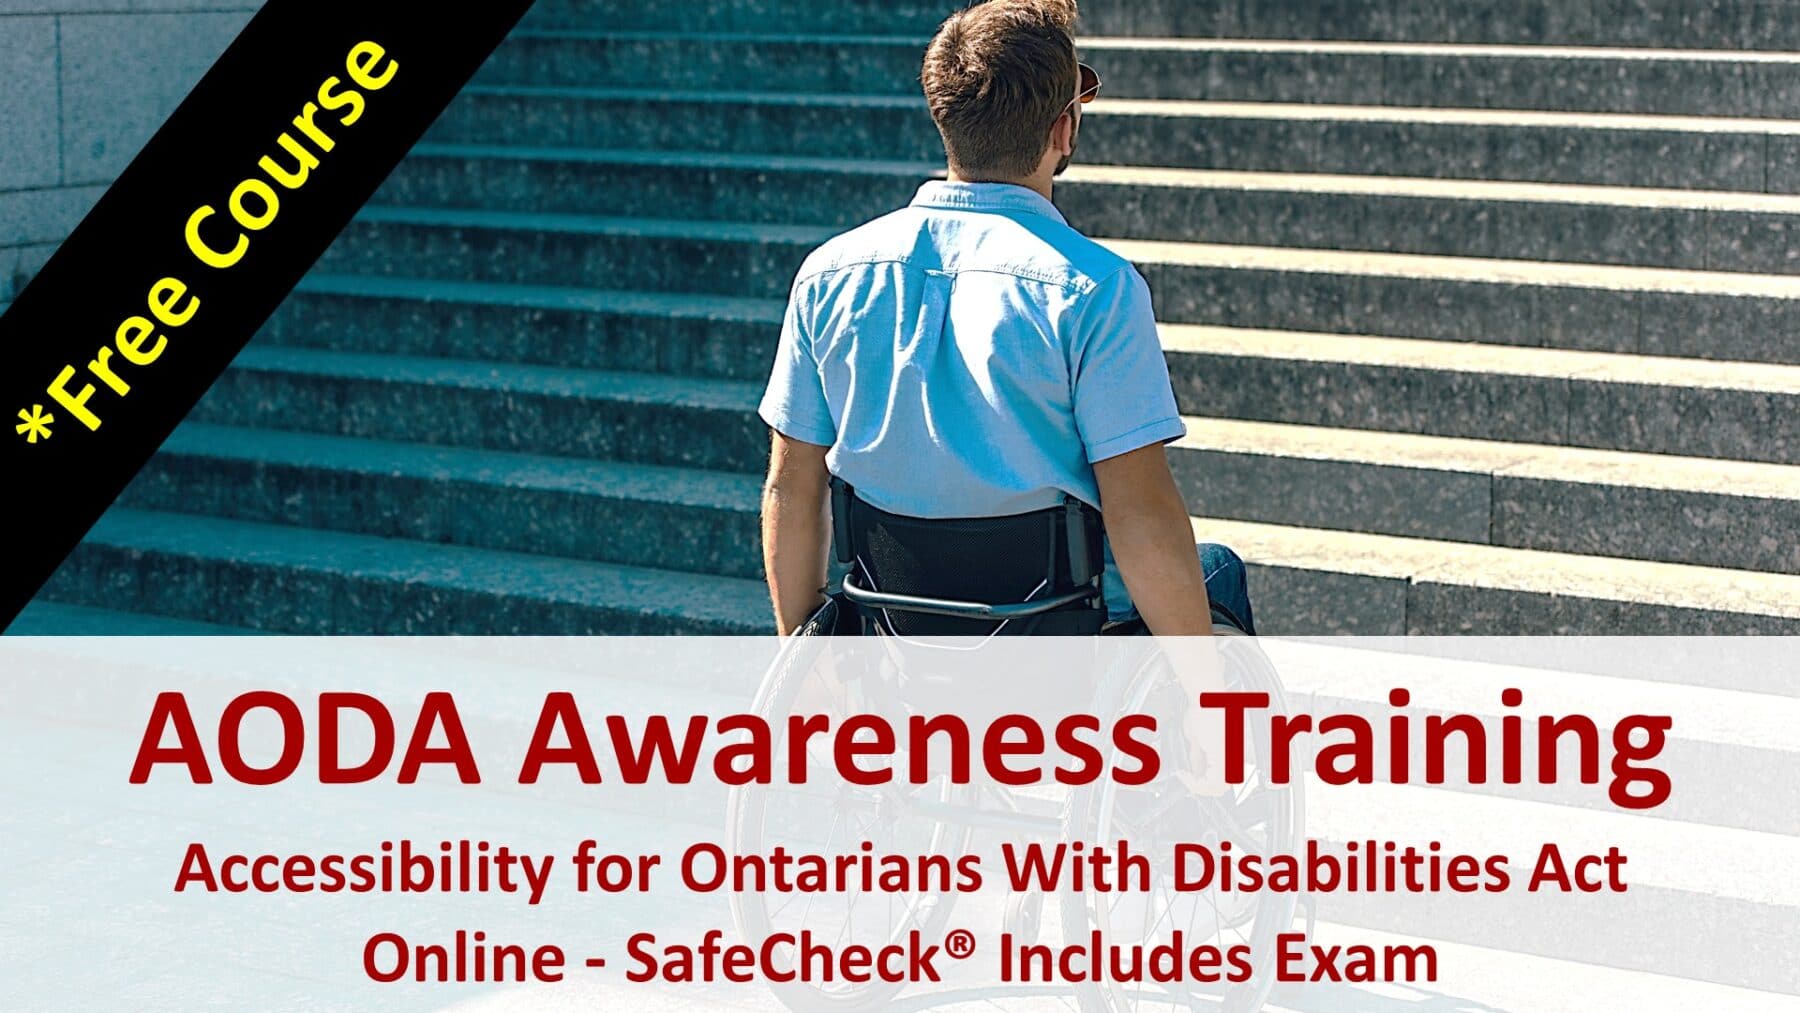 SafeCheck Accessibility for Ontarians With Disabilities Act Training